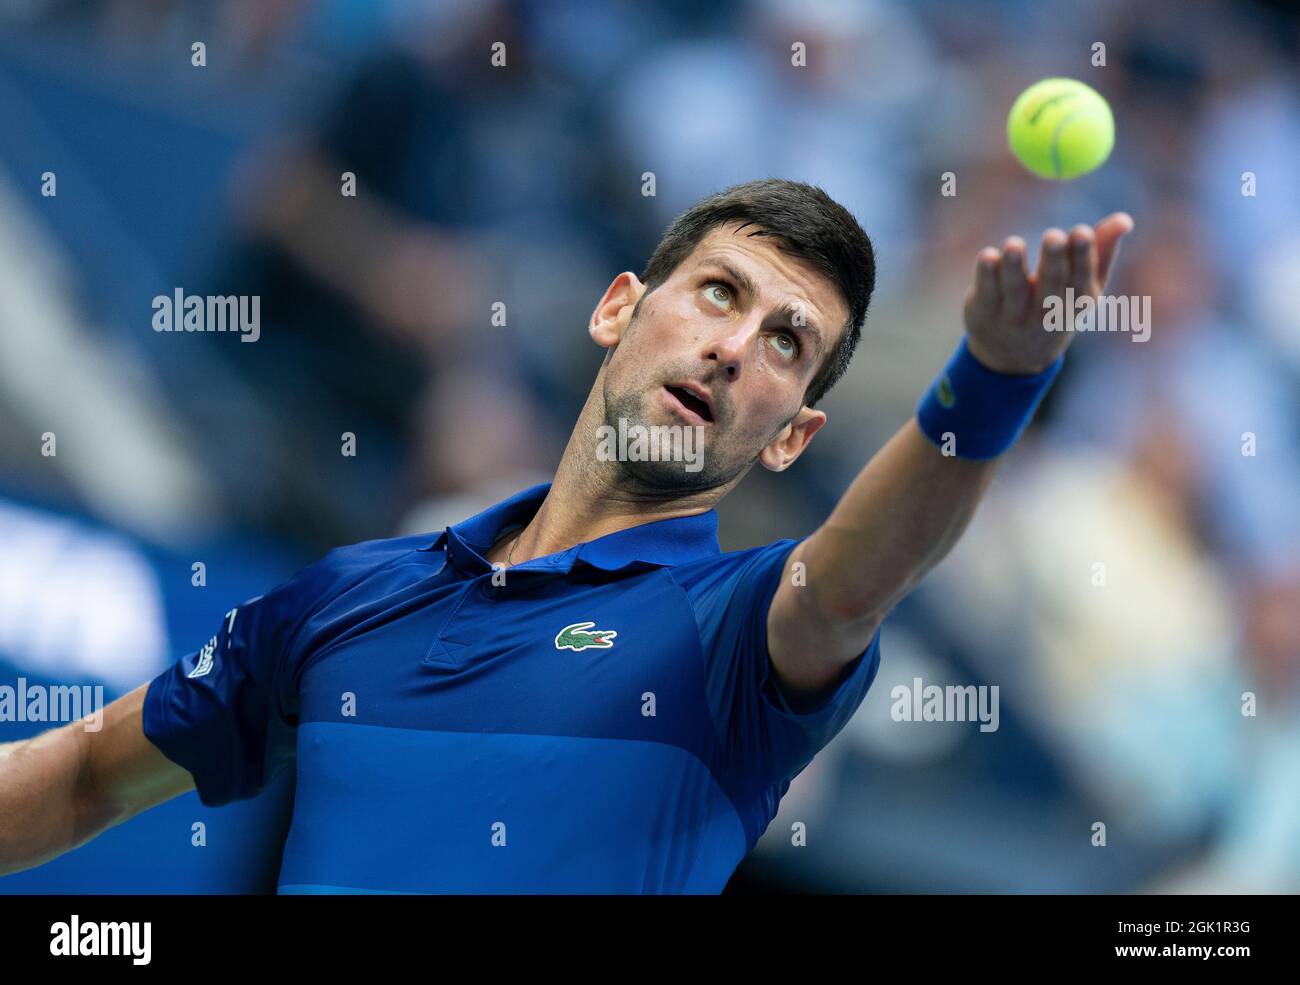 New York, USA, 12 September, 2021 Novak Djokovic (SRB) in action during the men's final against Daniil Medvedev (RUS) on day 14 at the 2021 US Open. Credit: Susan Mullane Credit: Susan Mullane/Alamy Live News Stock Photo